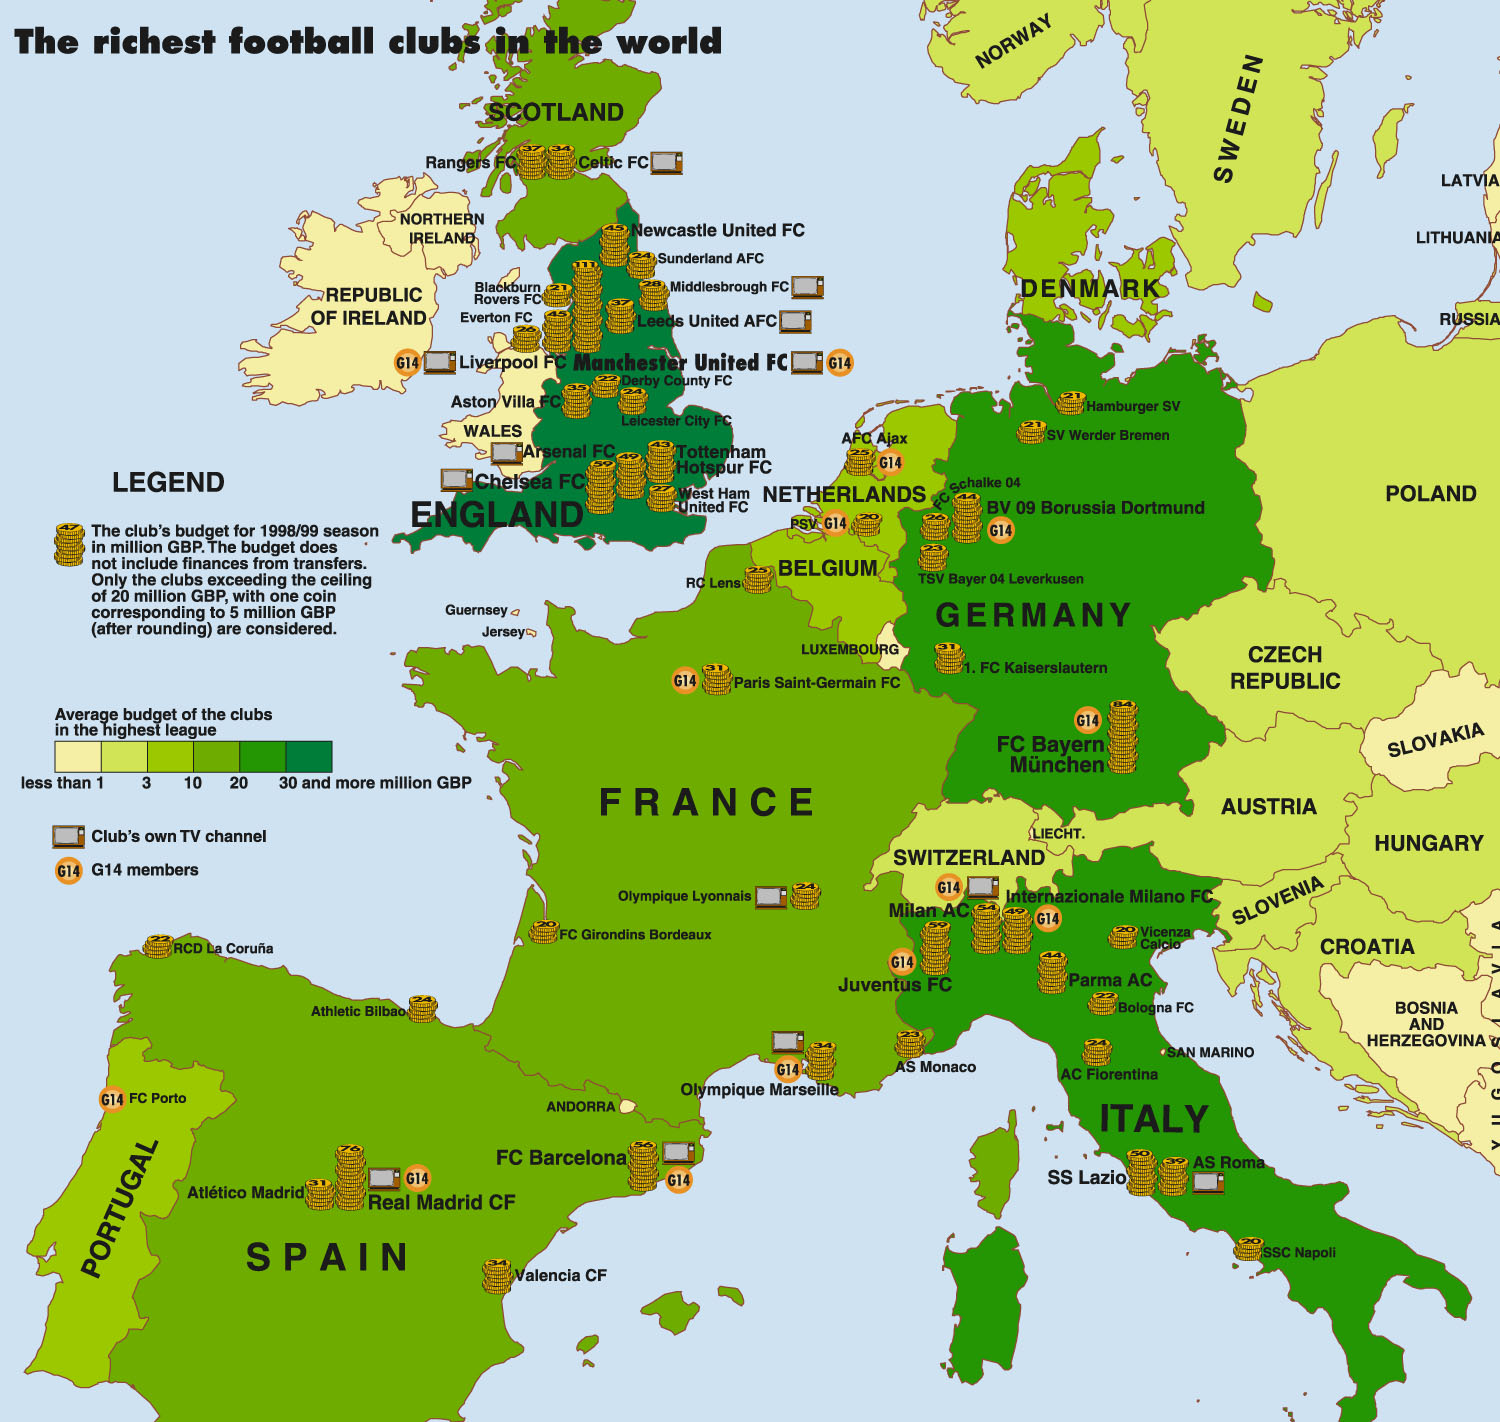 The richest football clubs in the world - whole map